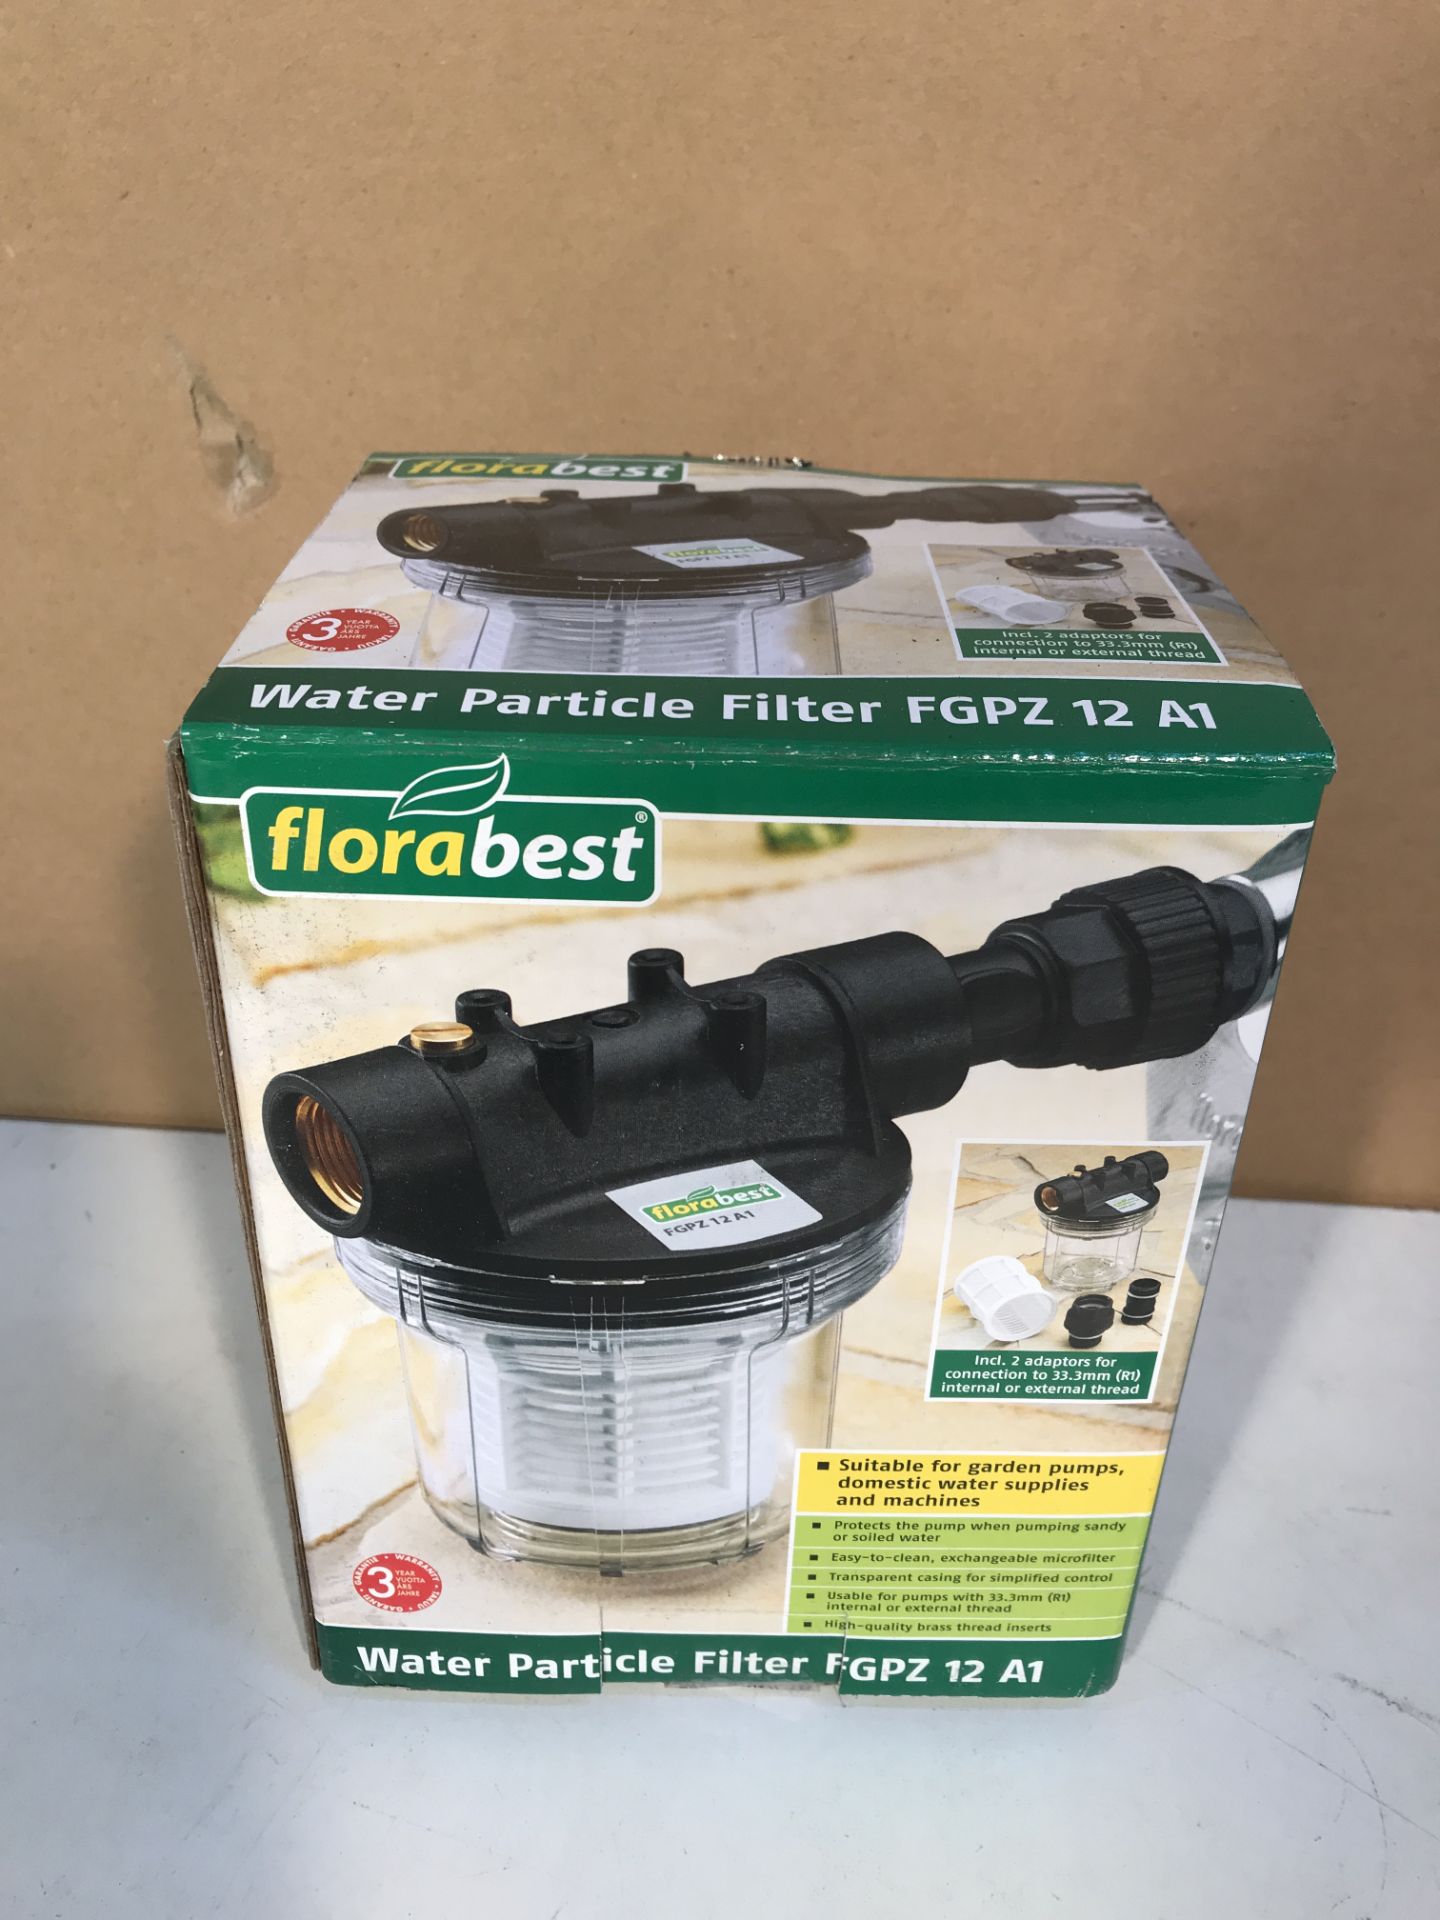 2 x Florabest Water Particle Filter FGPZ 12 A1 - Image 2 of 5